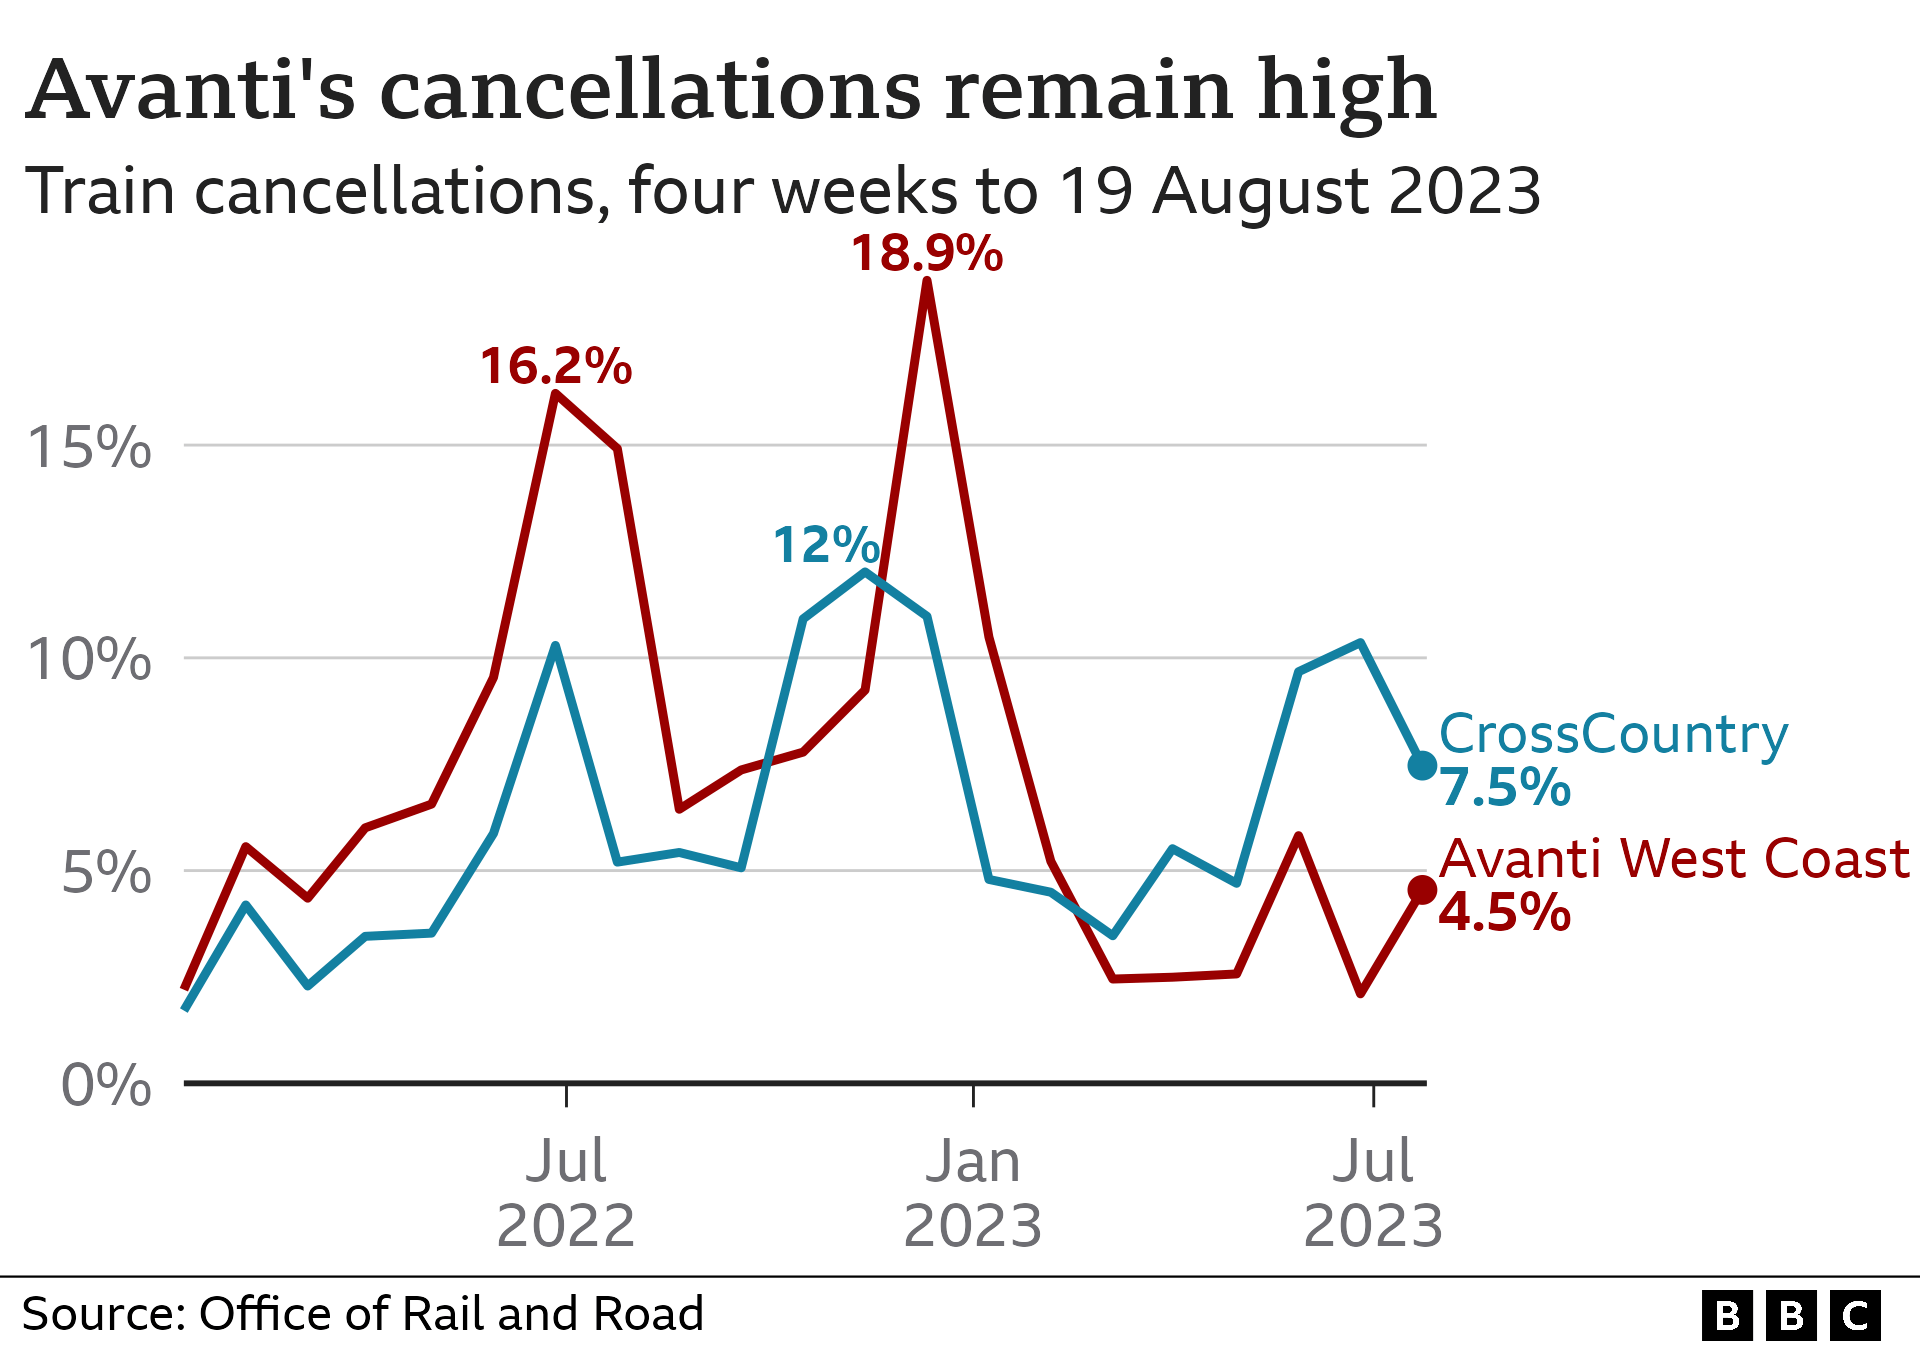 Line chart showing the change in cancellations for CrossCountry and Avanti West Coast.